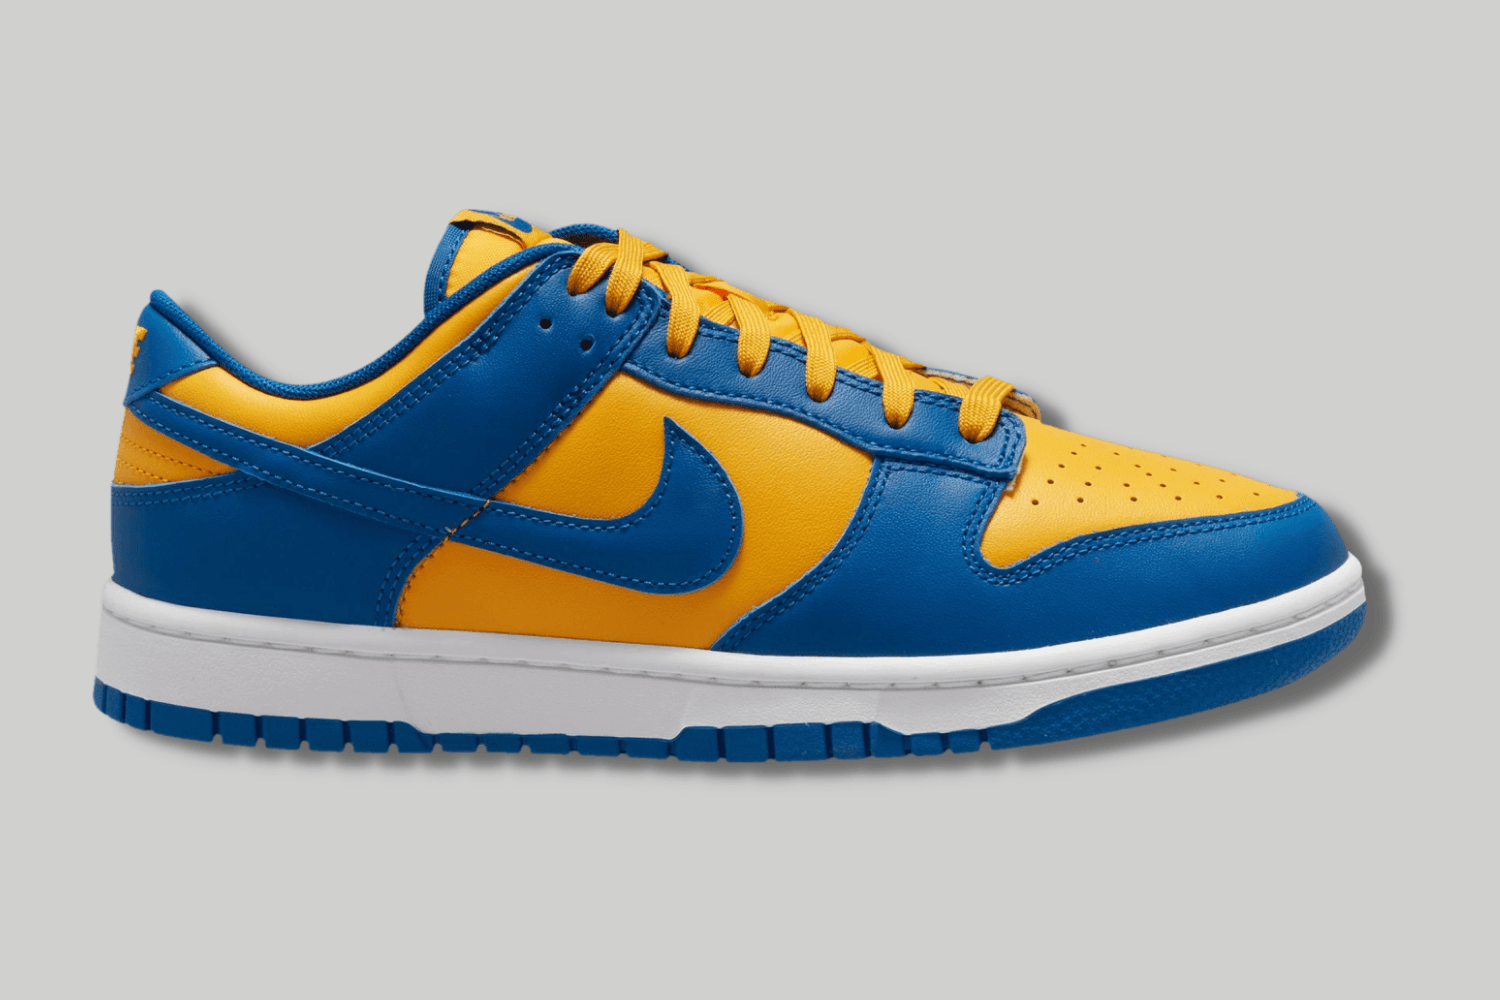 The Nike Dunk Low appears in a 'UCLA' colorway